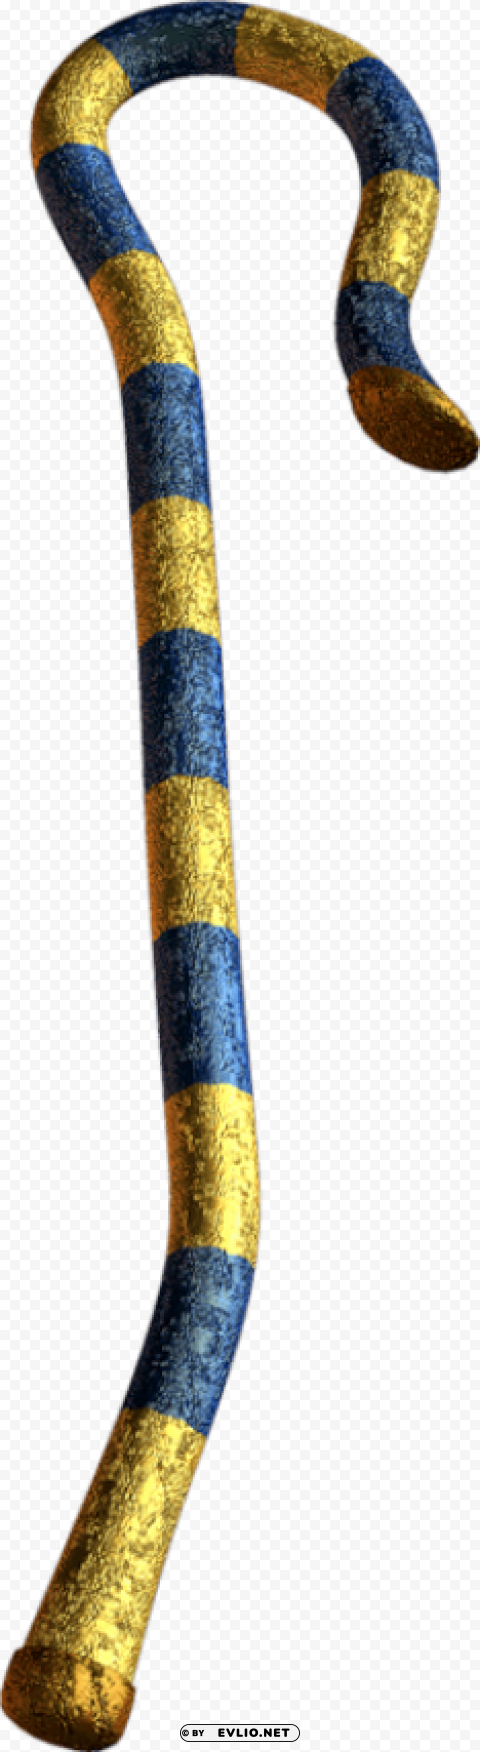 Pharaoh Shepherds Staff And Flail PNG Images For Graphic Design